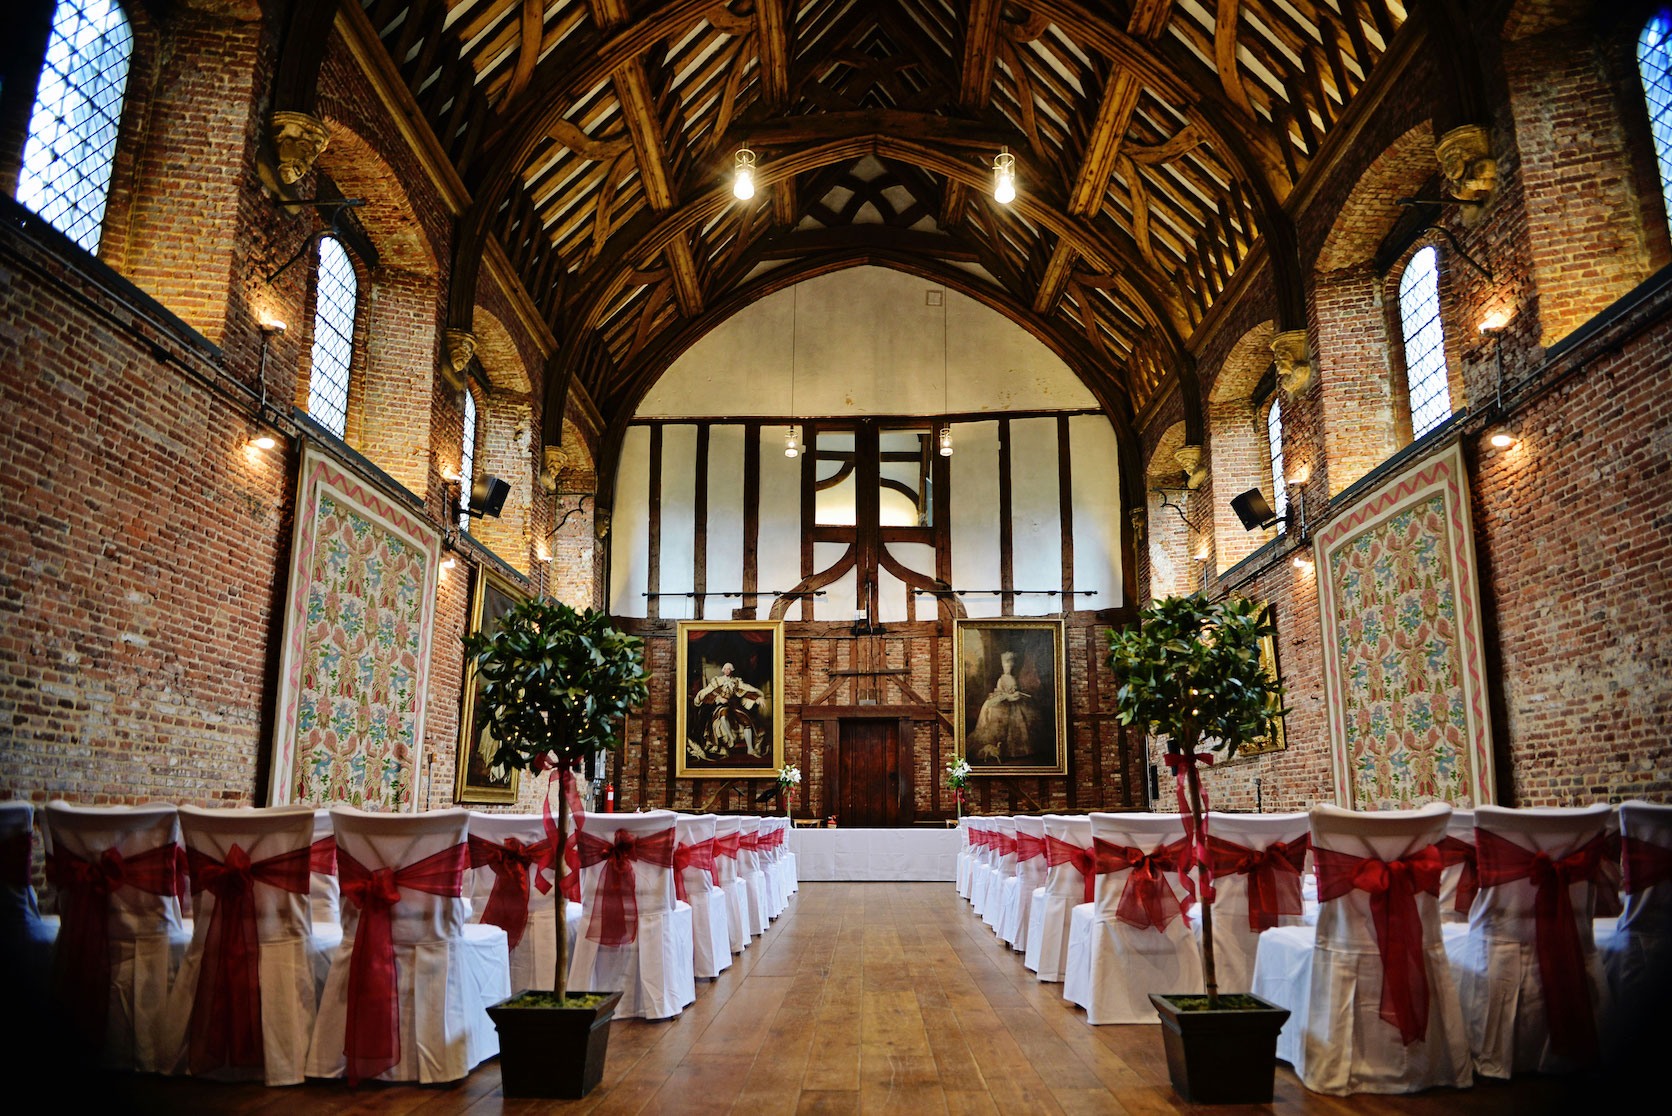 Wedding venues: grand country houses